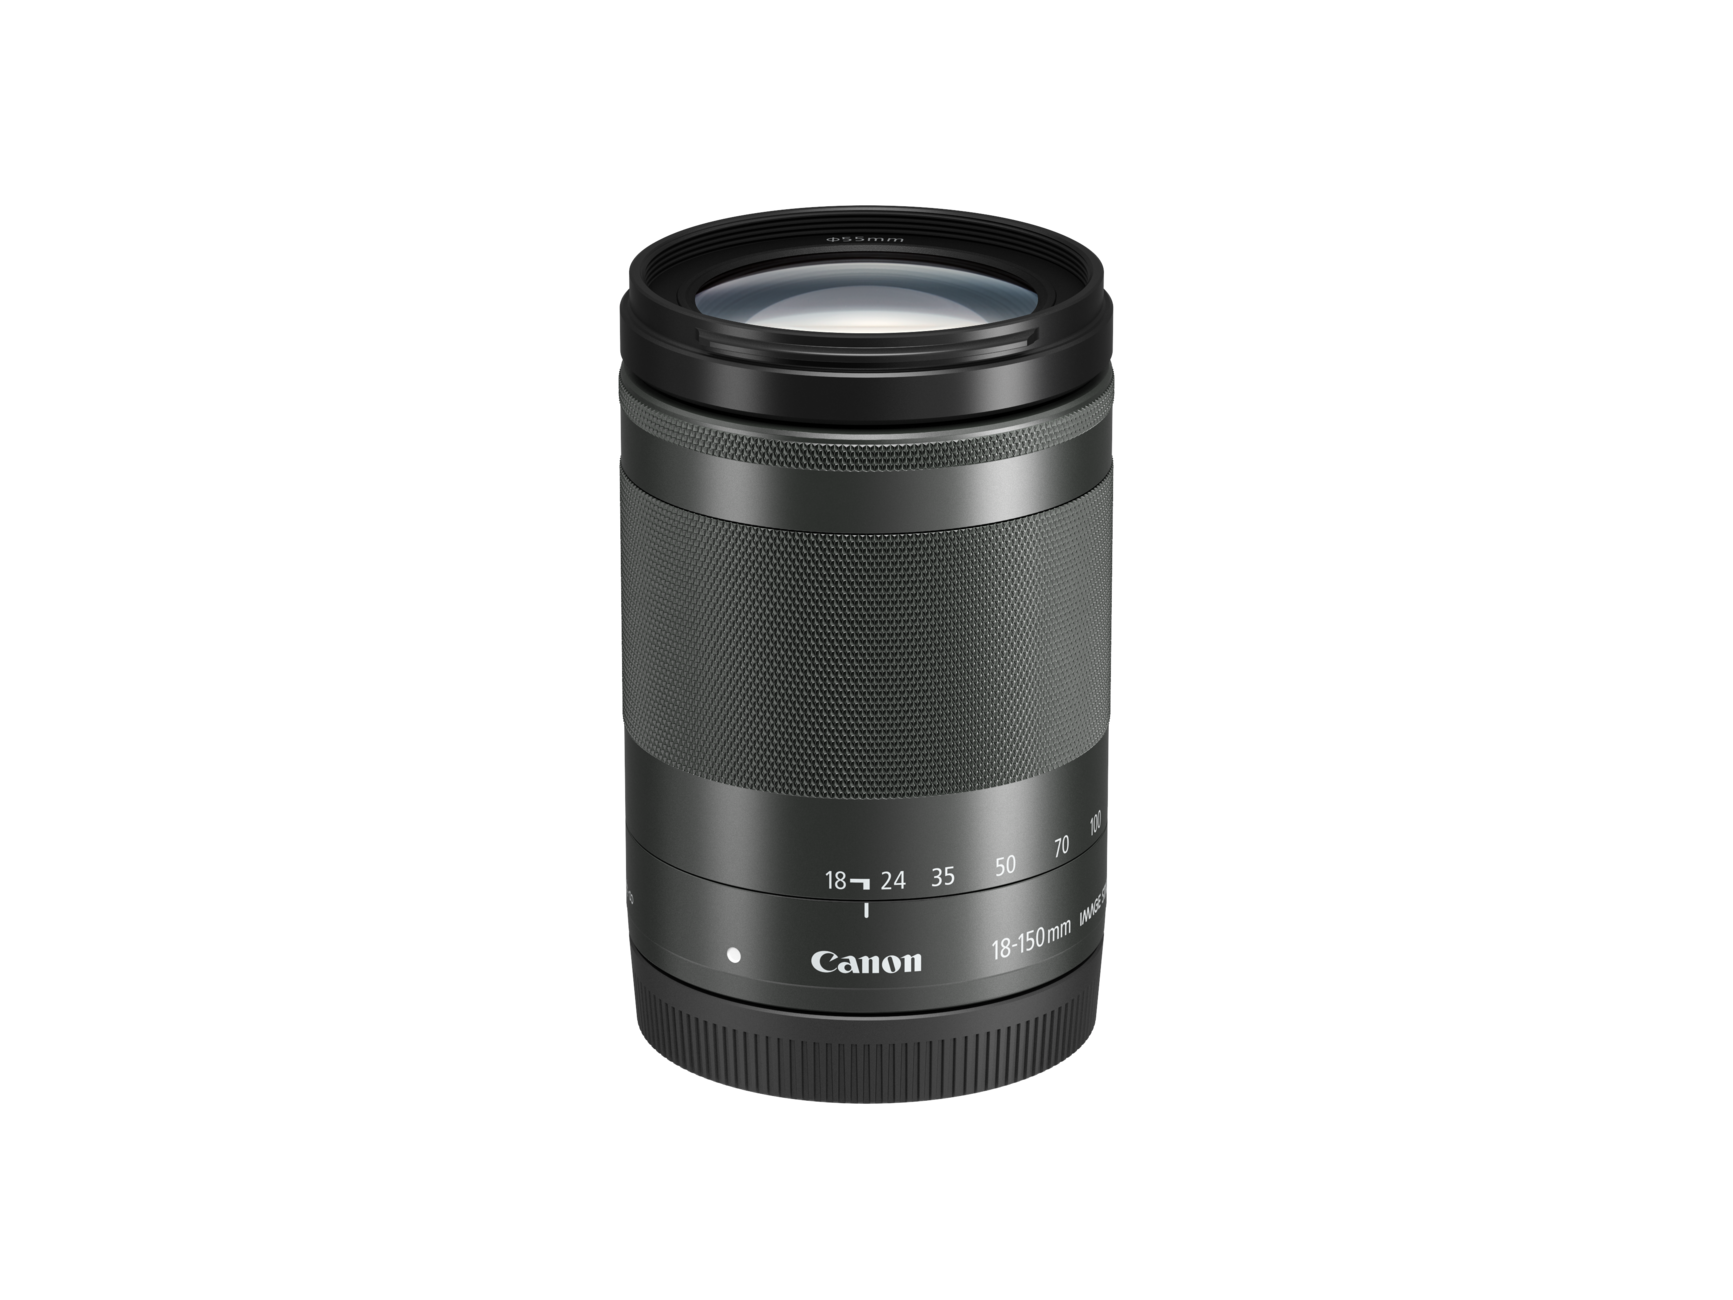 Canon EF-M 18-150 f3.5-6.3 IS STM